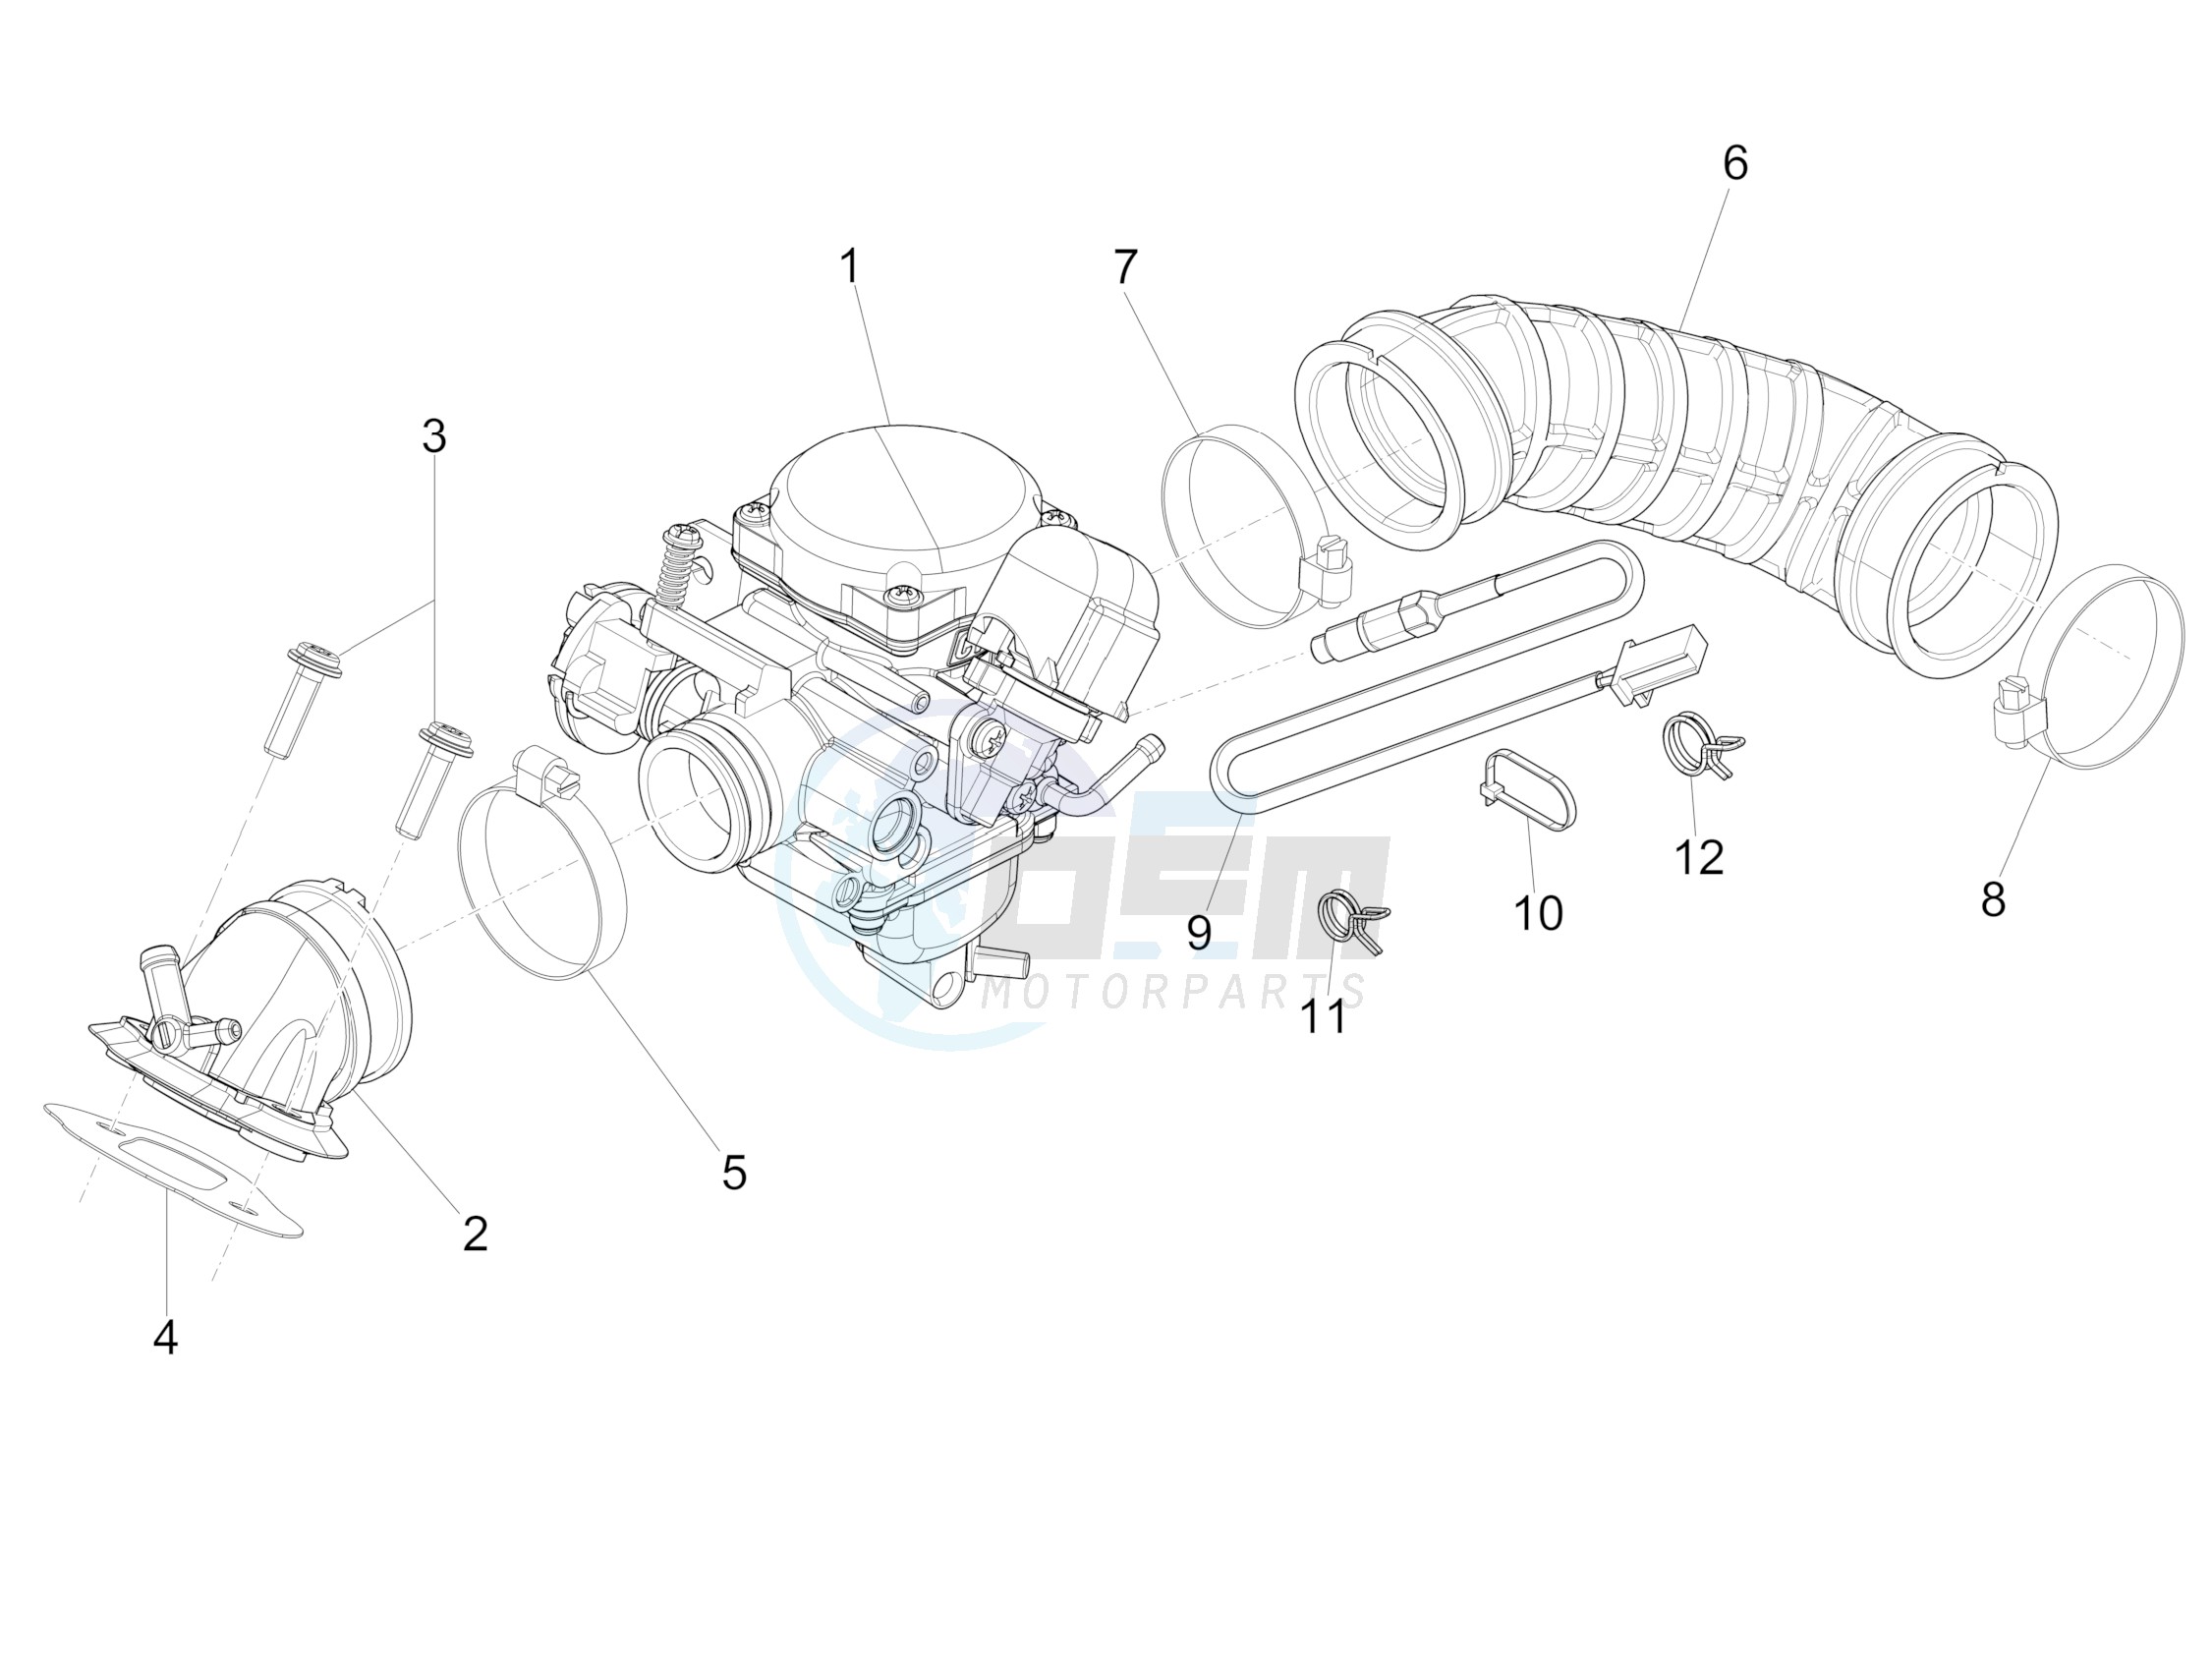 Carburettor, assembly - Union pipe blueprint